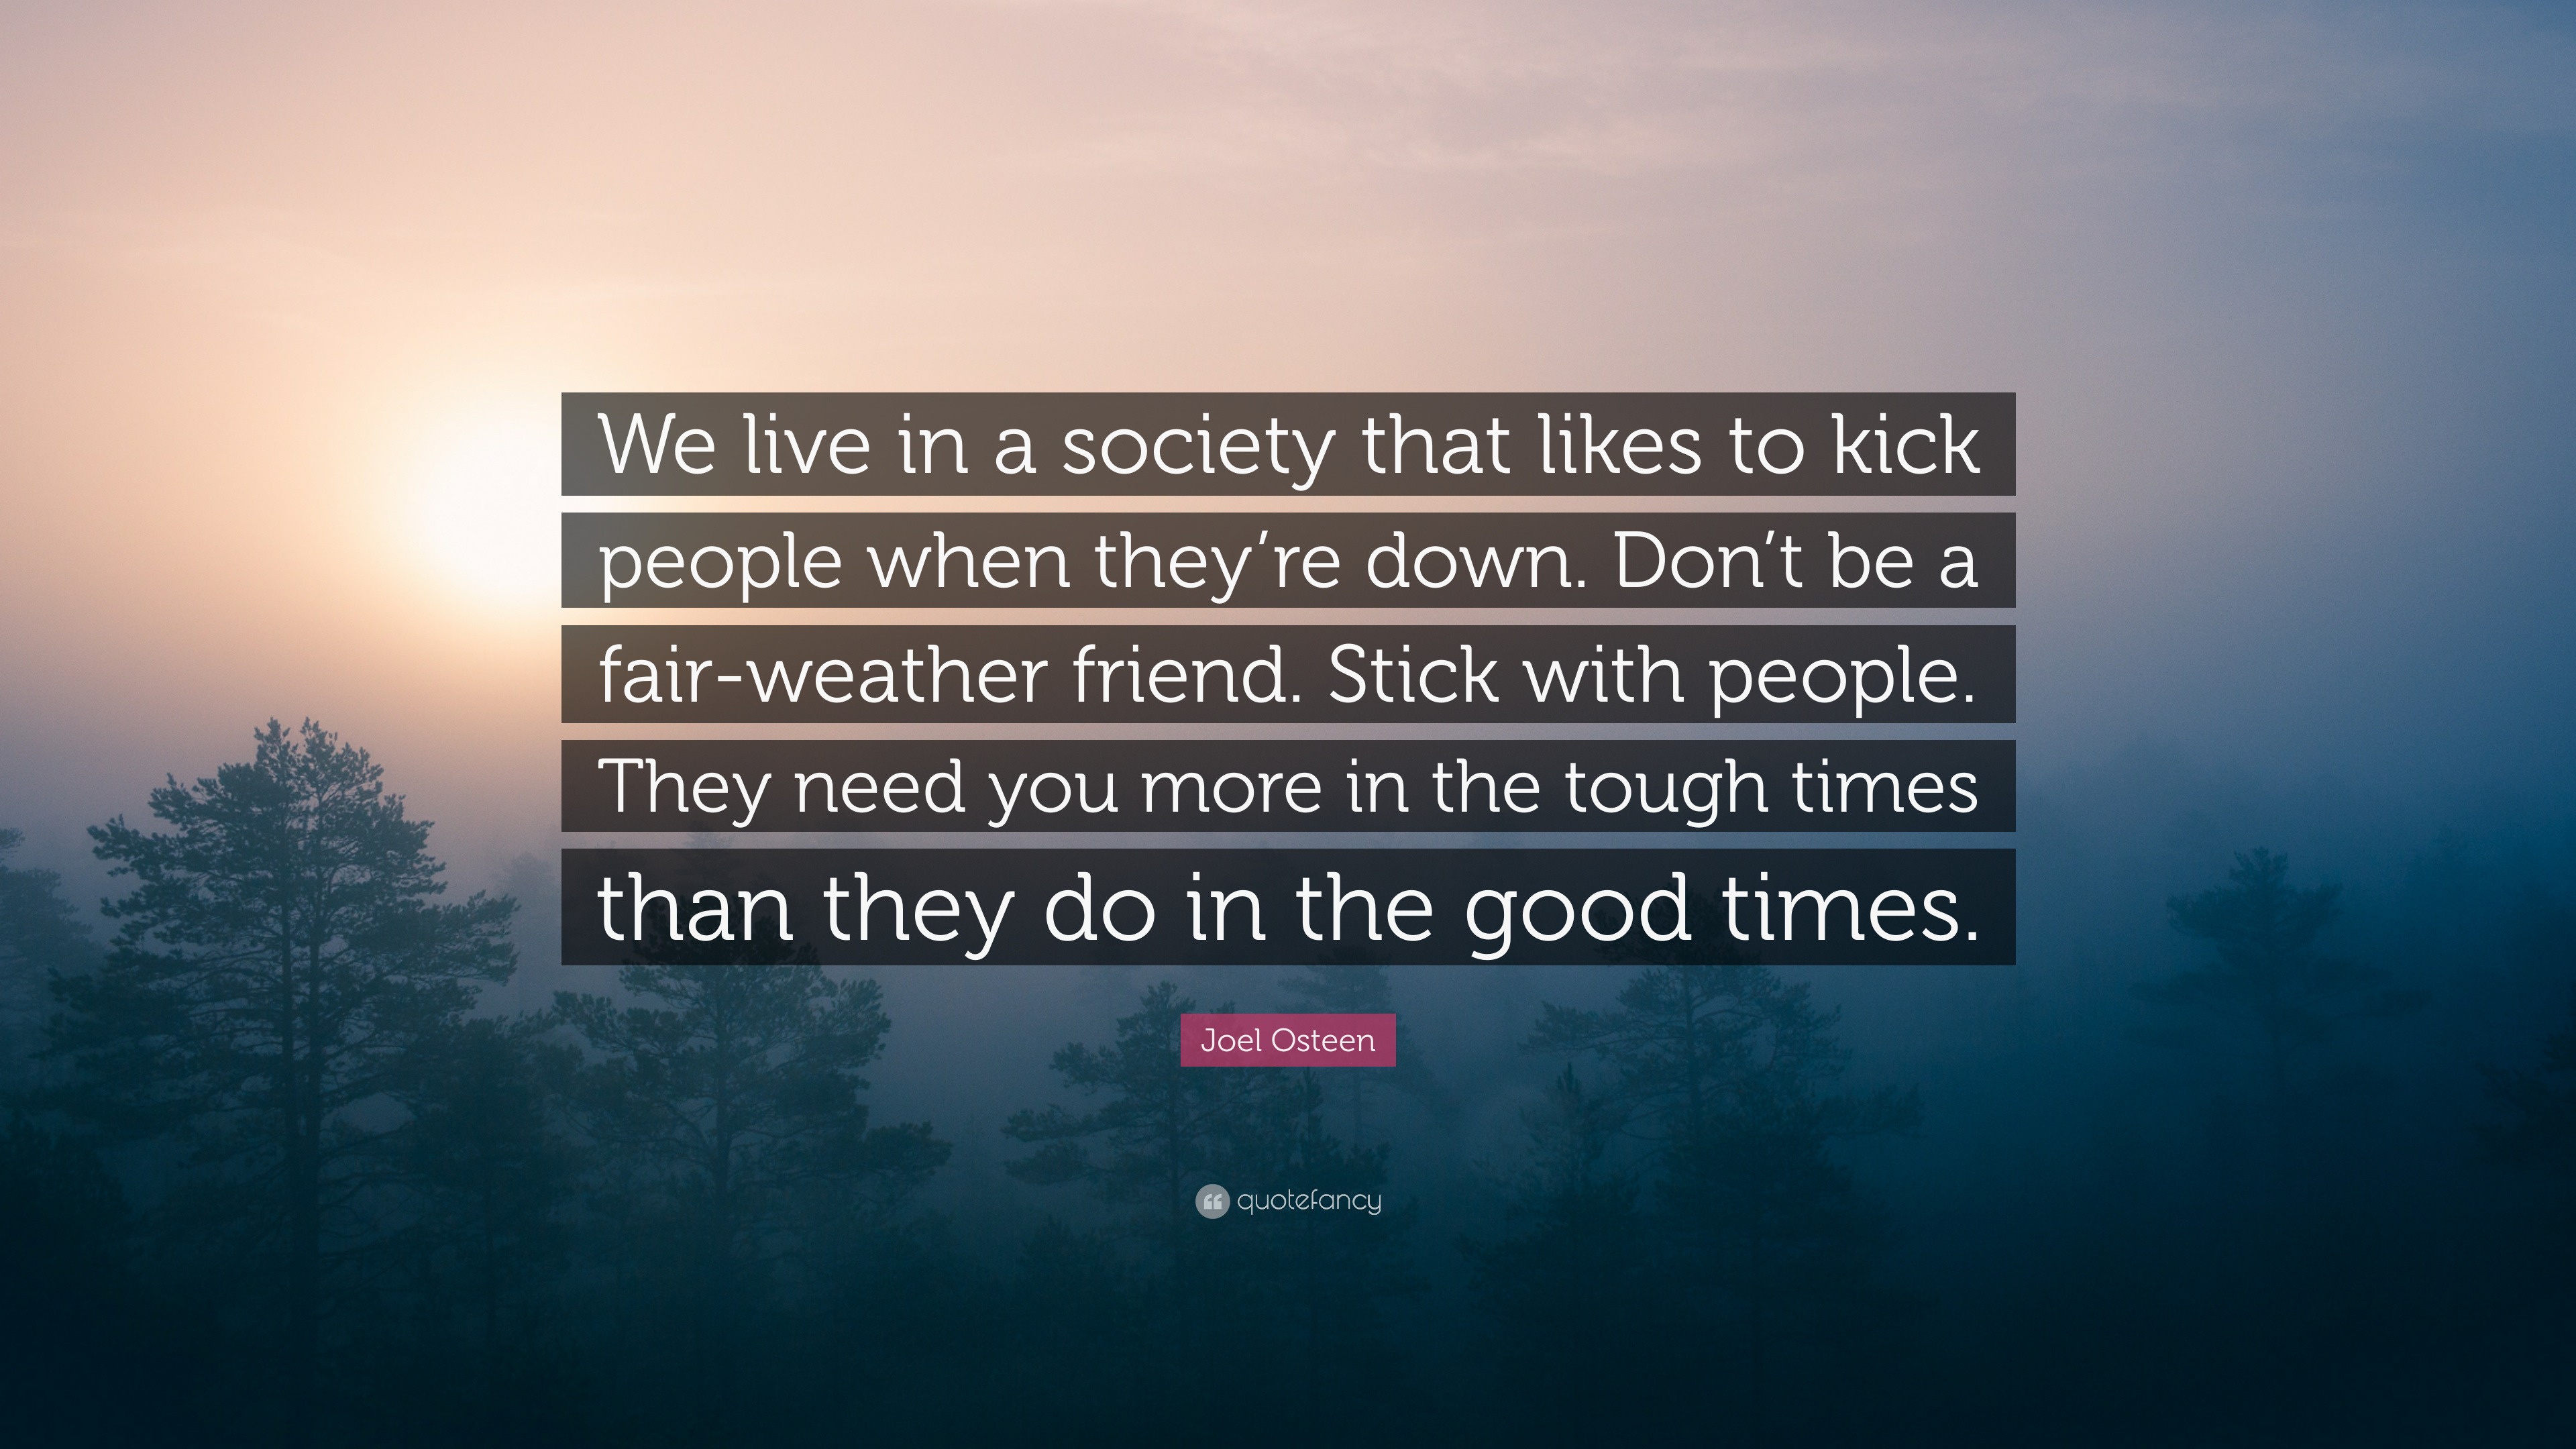 Joel Osteen Quote: "We live in a society that likes to ...